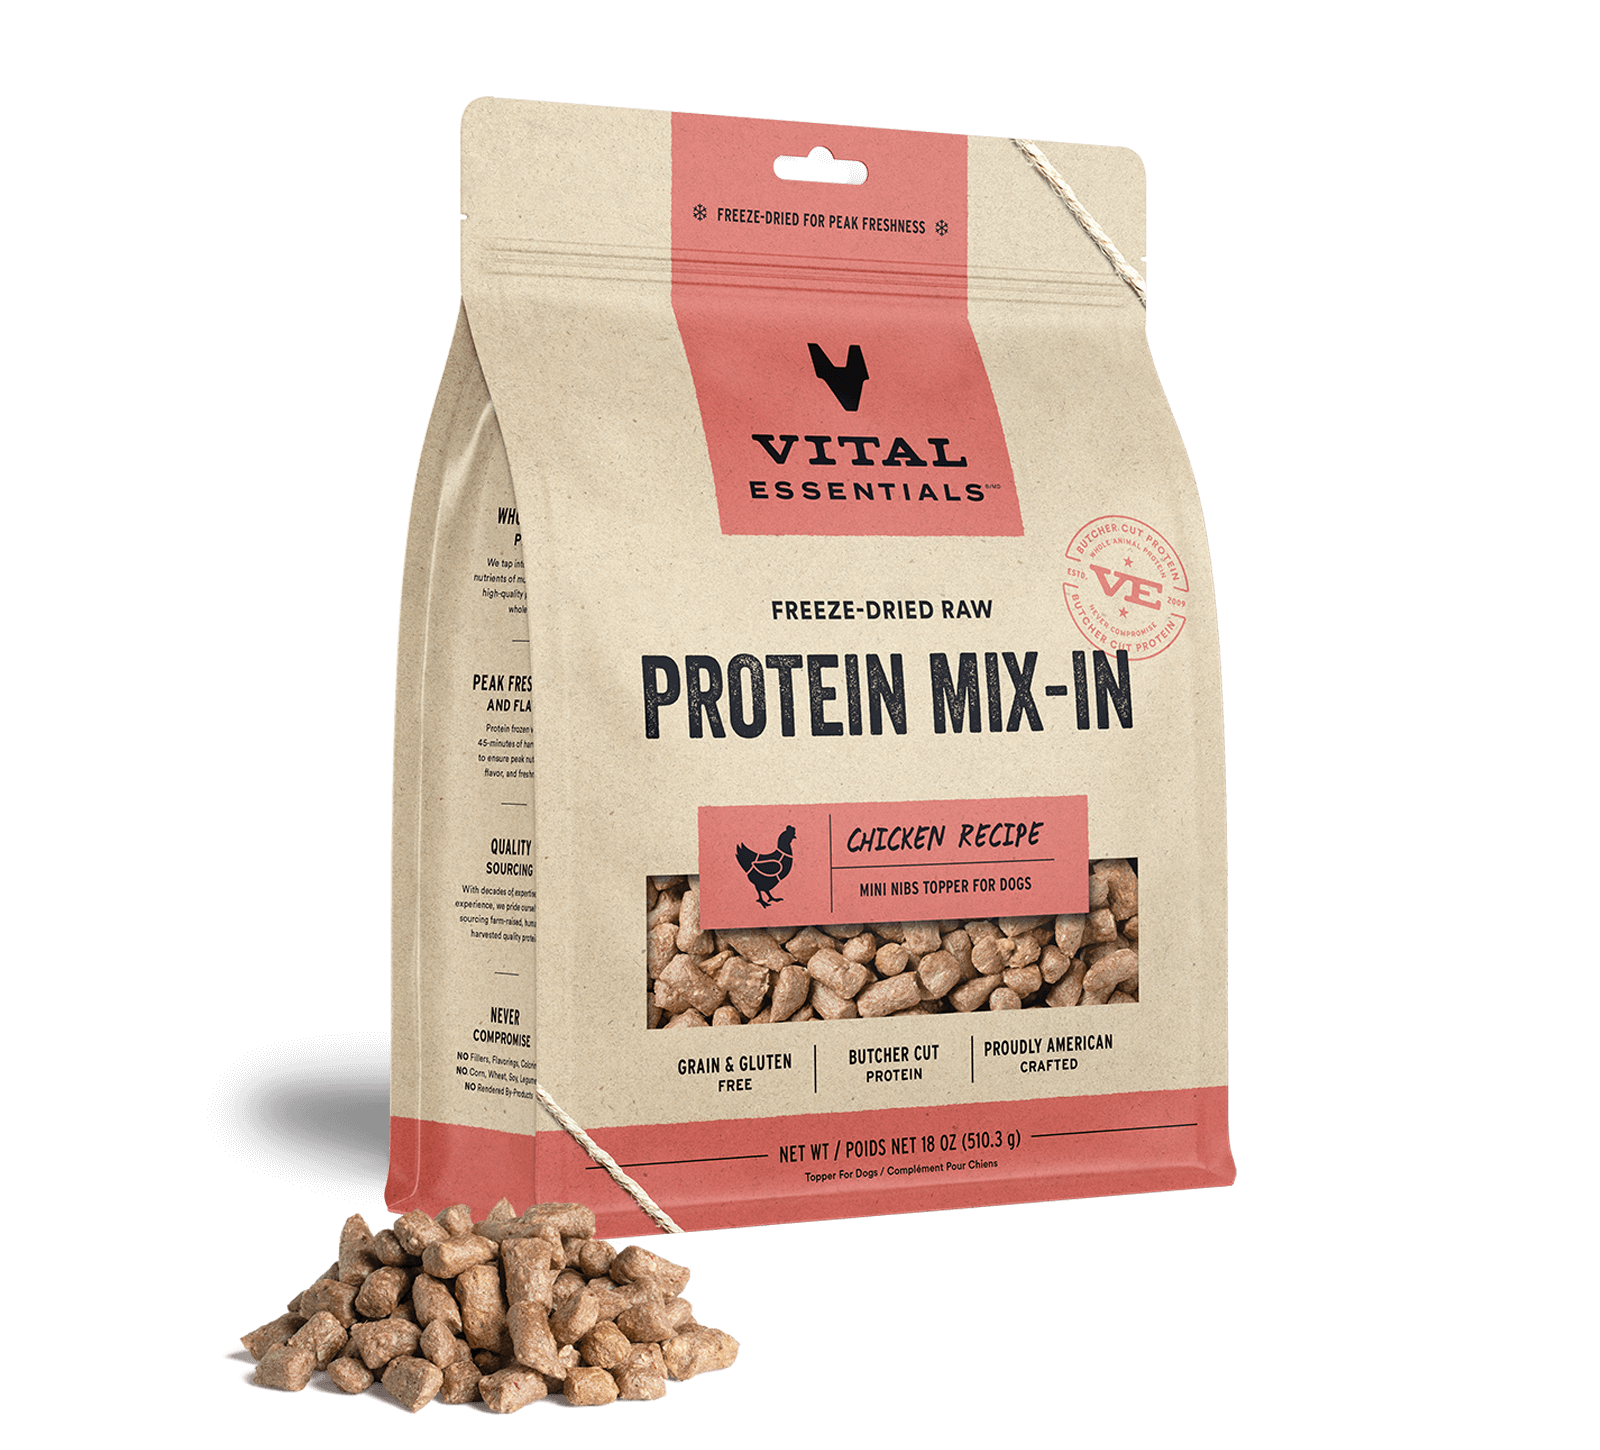 Vital Essentials Freeze-Dried Raw Protein Mix-In Chicken Recipe Mini Nibs Topper for Dogs, 18 oz - Items on Sale Now